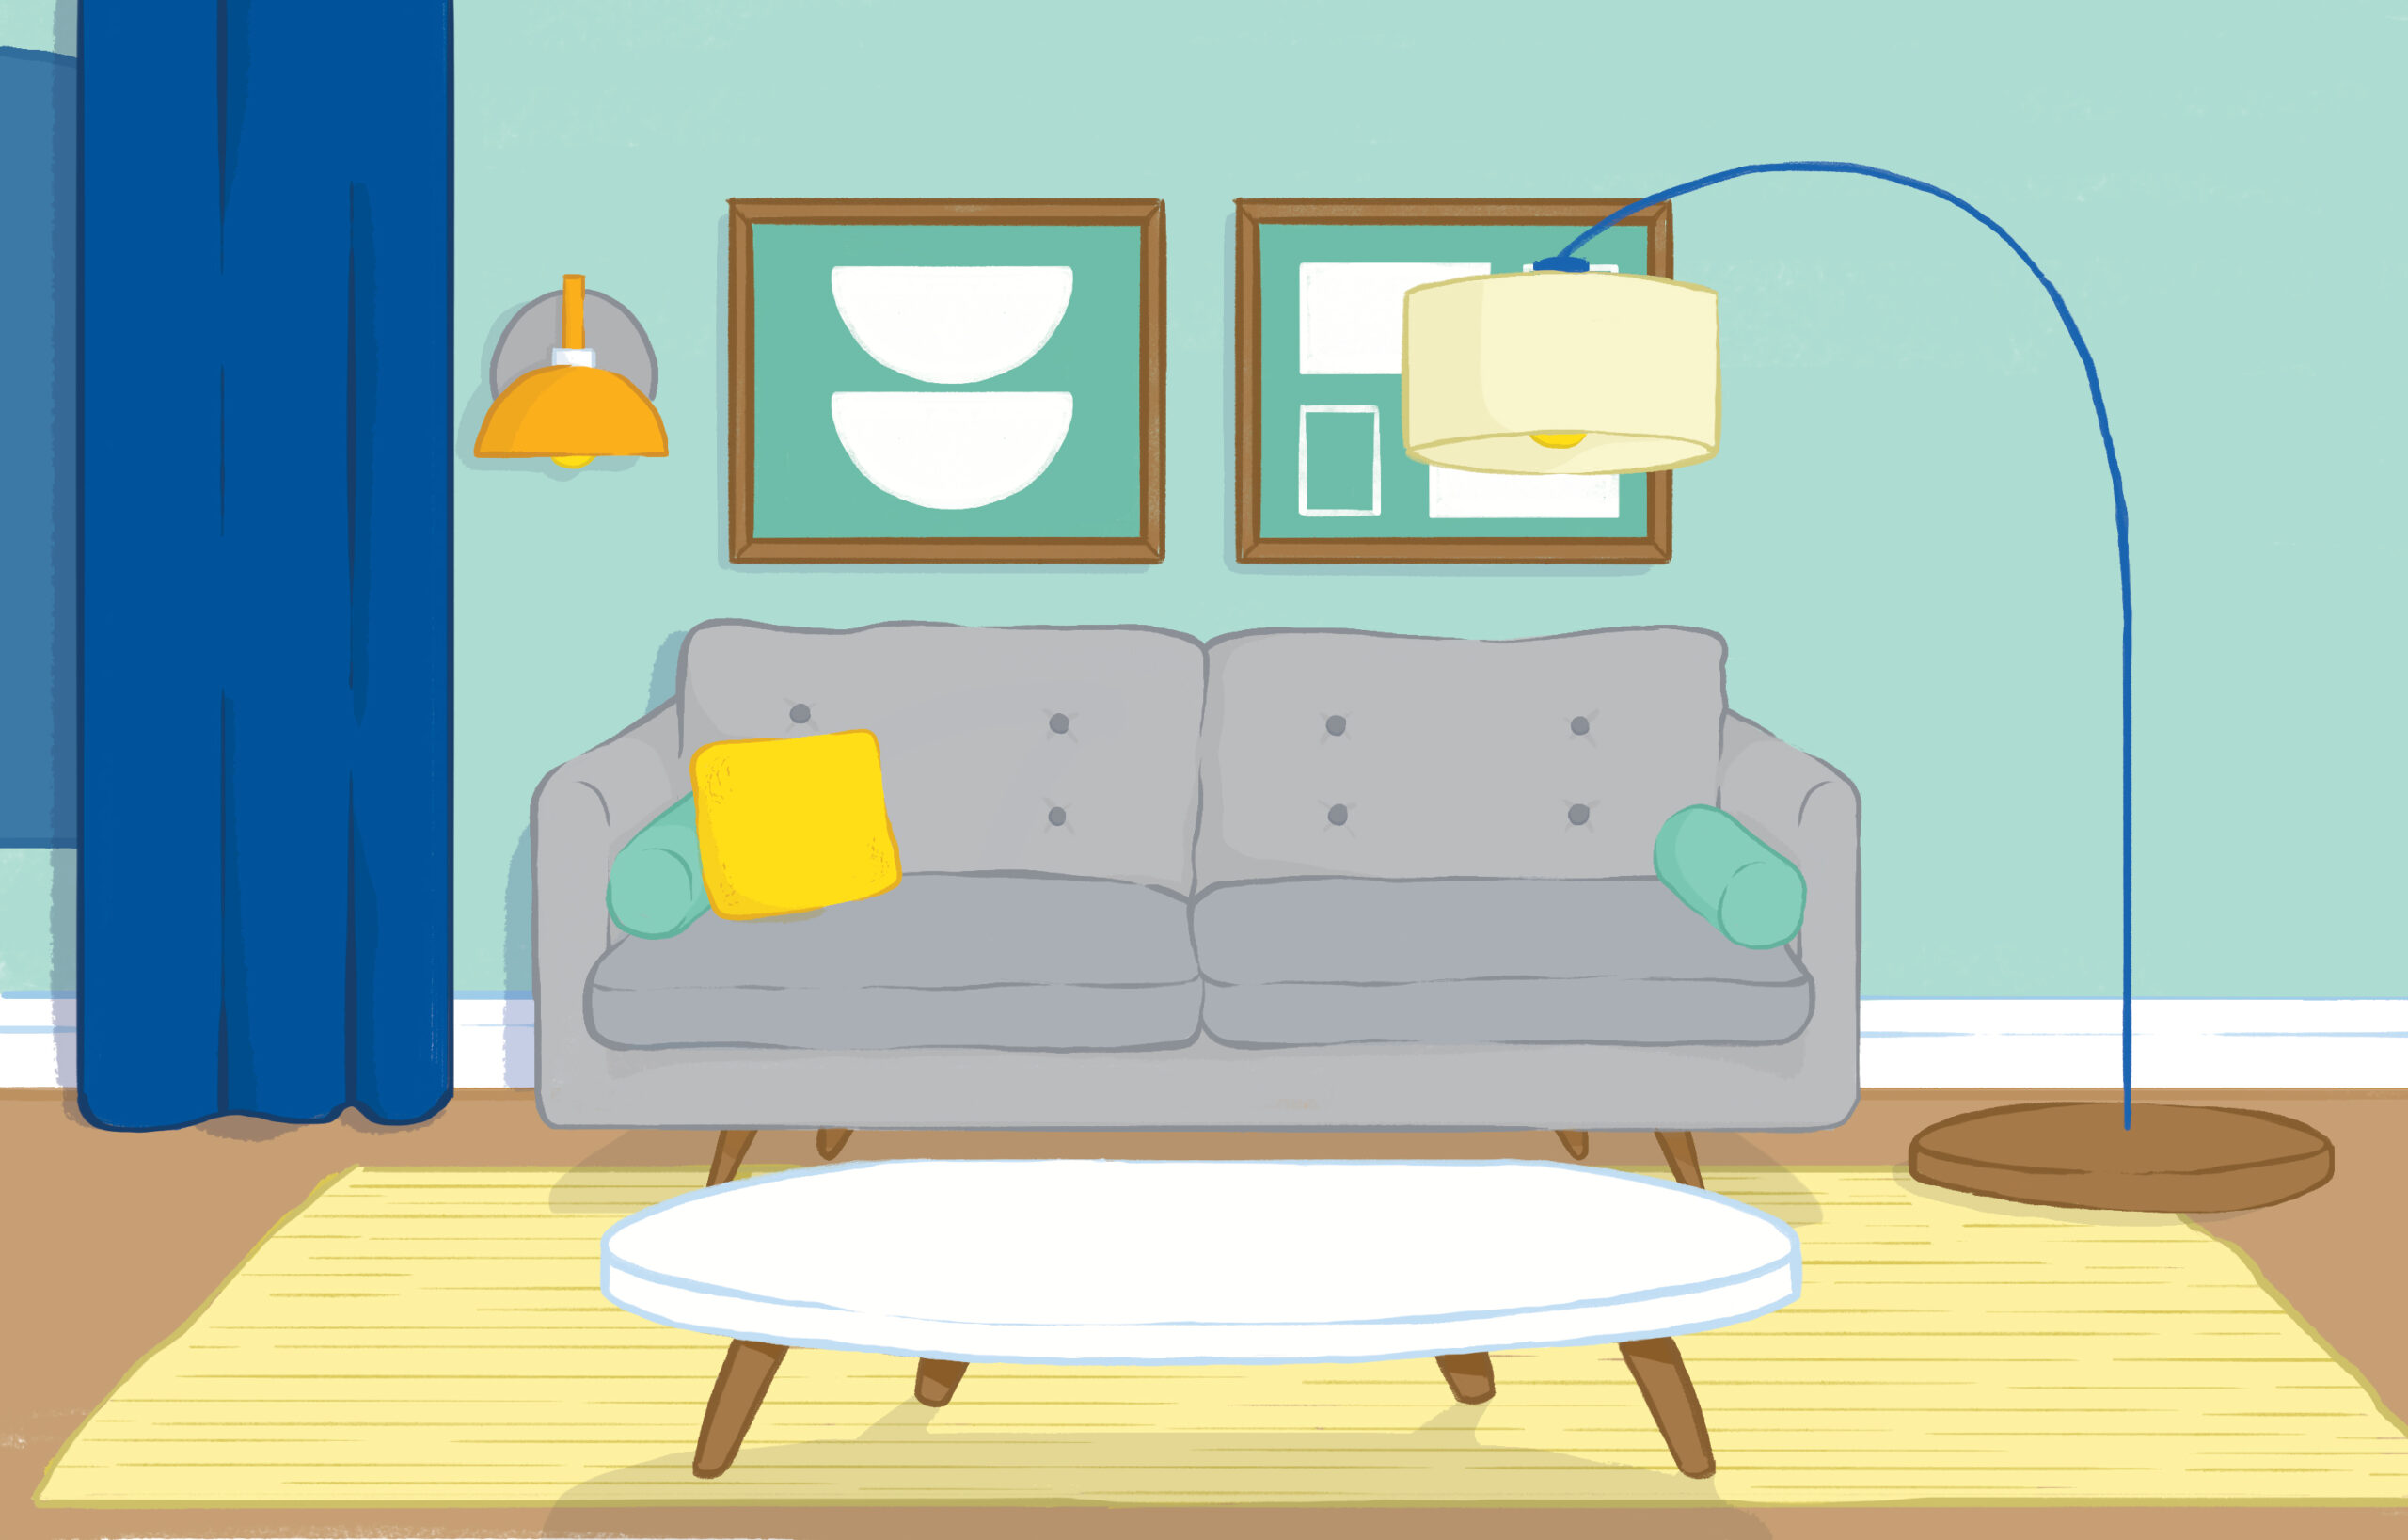 Illustration of home interior with this season's decor trends